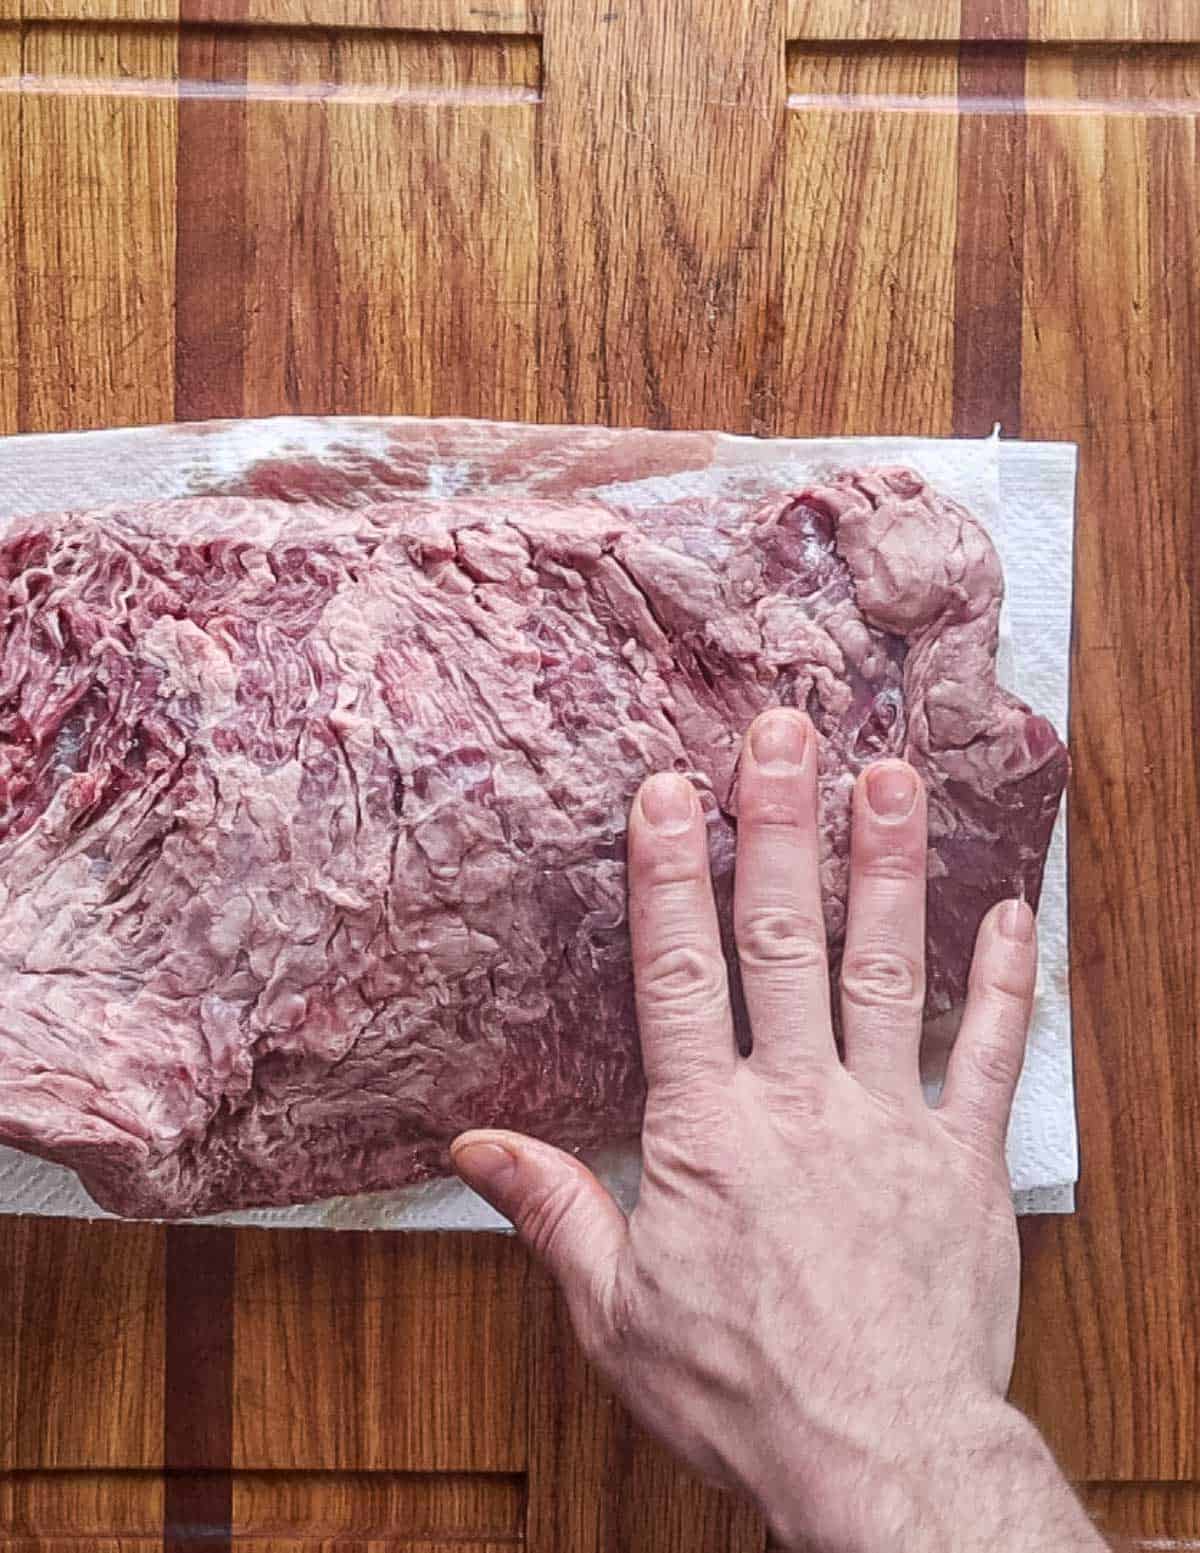 Patting a steak dry on paper towels before cooking.